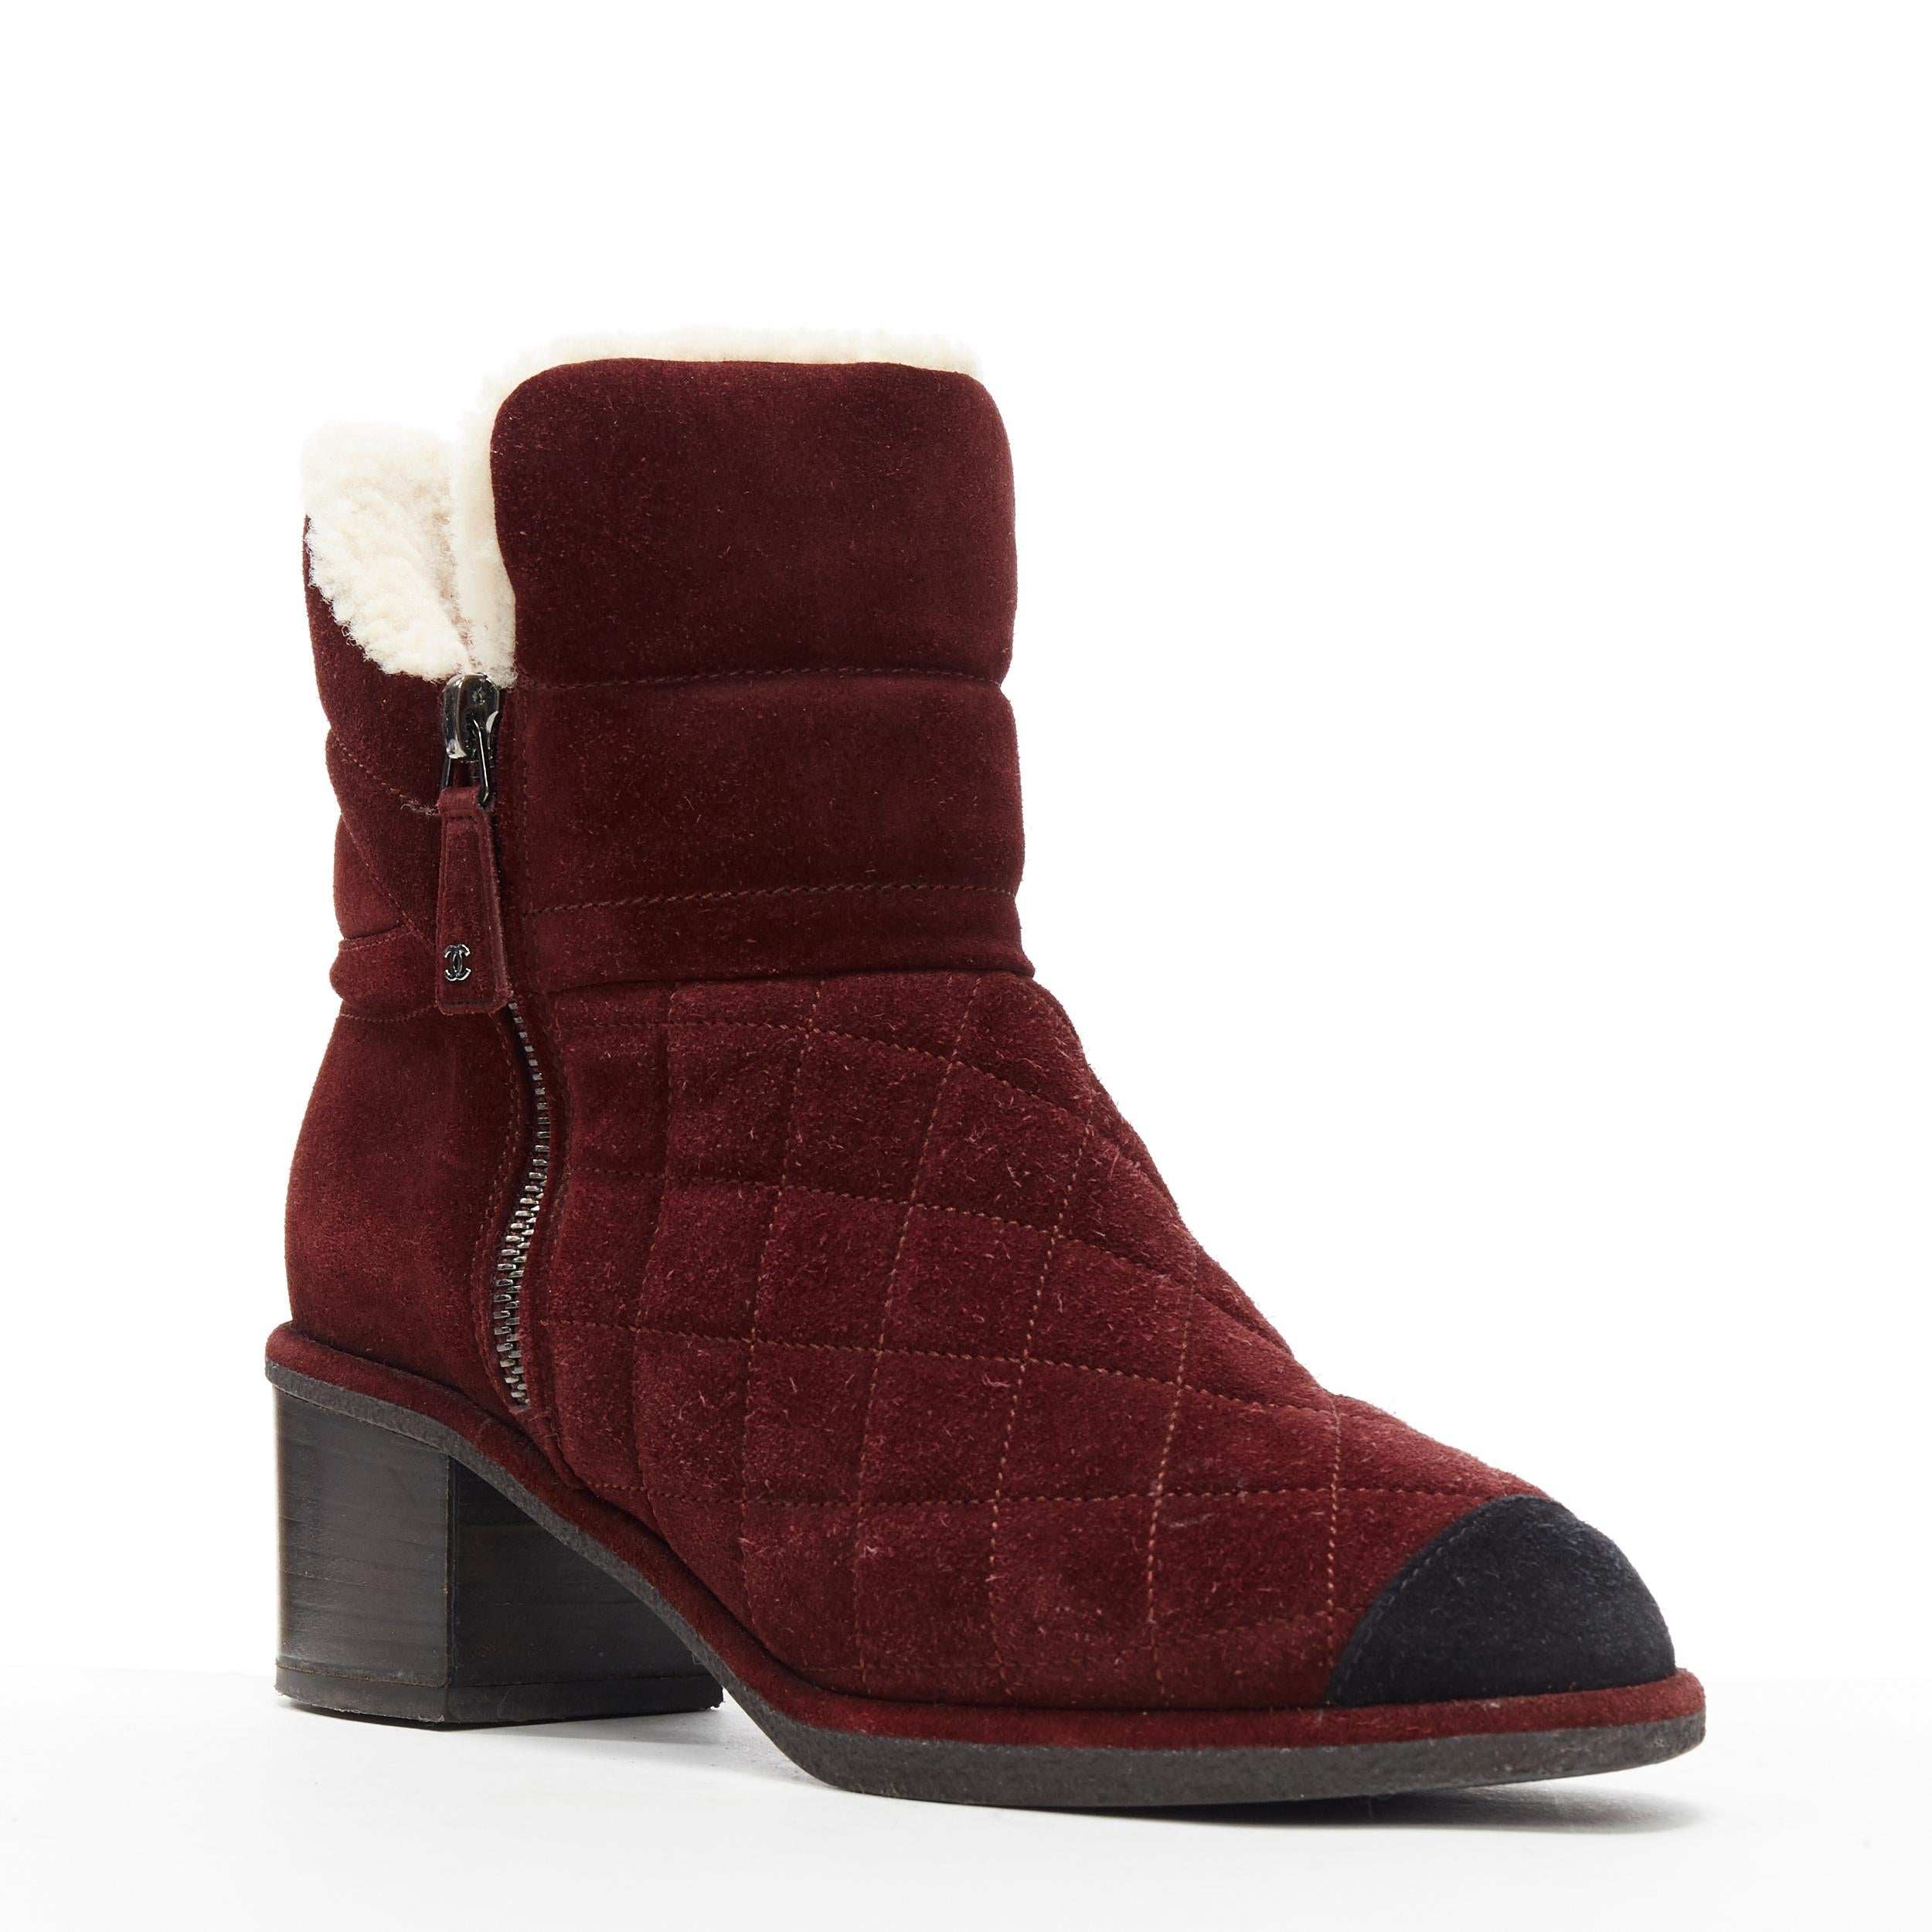 CHANEL burgundy CC red diamond quilted suede toe cap shearling ankle boot EU37
Brand: Chanel
Designer: Karl Lagerfeld
Model Name / Style: Shearling boot
Material: Suede
Color: Burgundy
Pattern: Solid
Closure: Zip
Extra Detail: Mid (2-2.9 in) heel